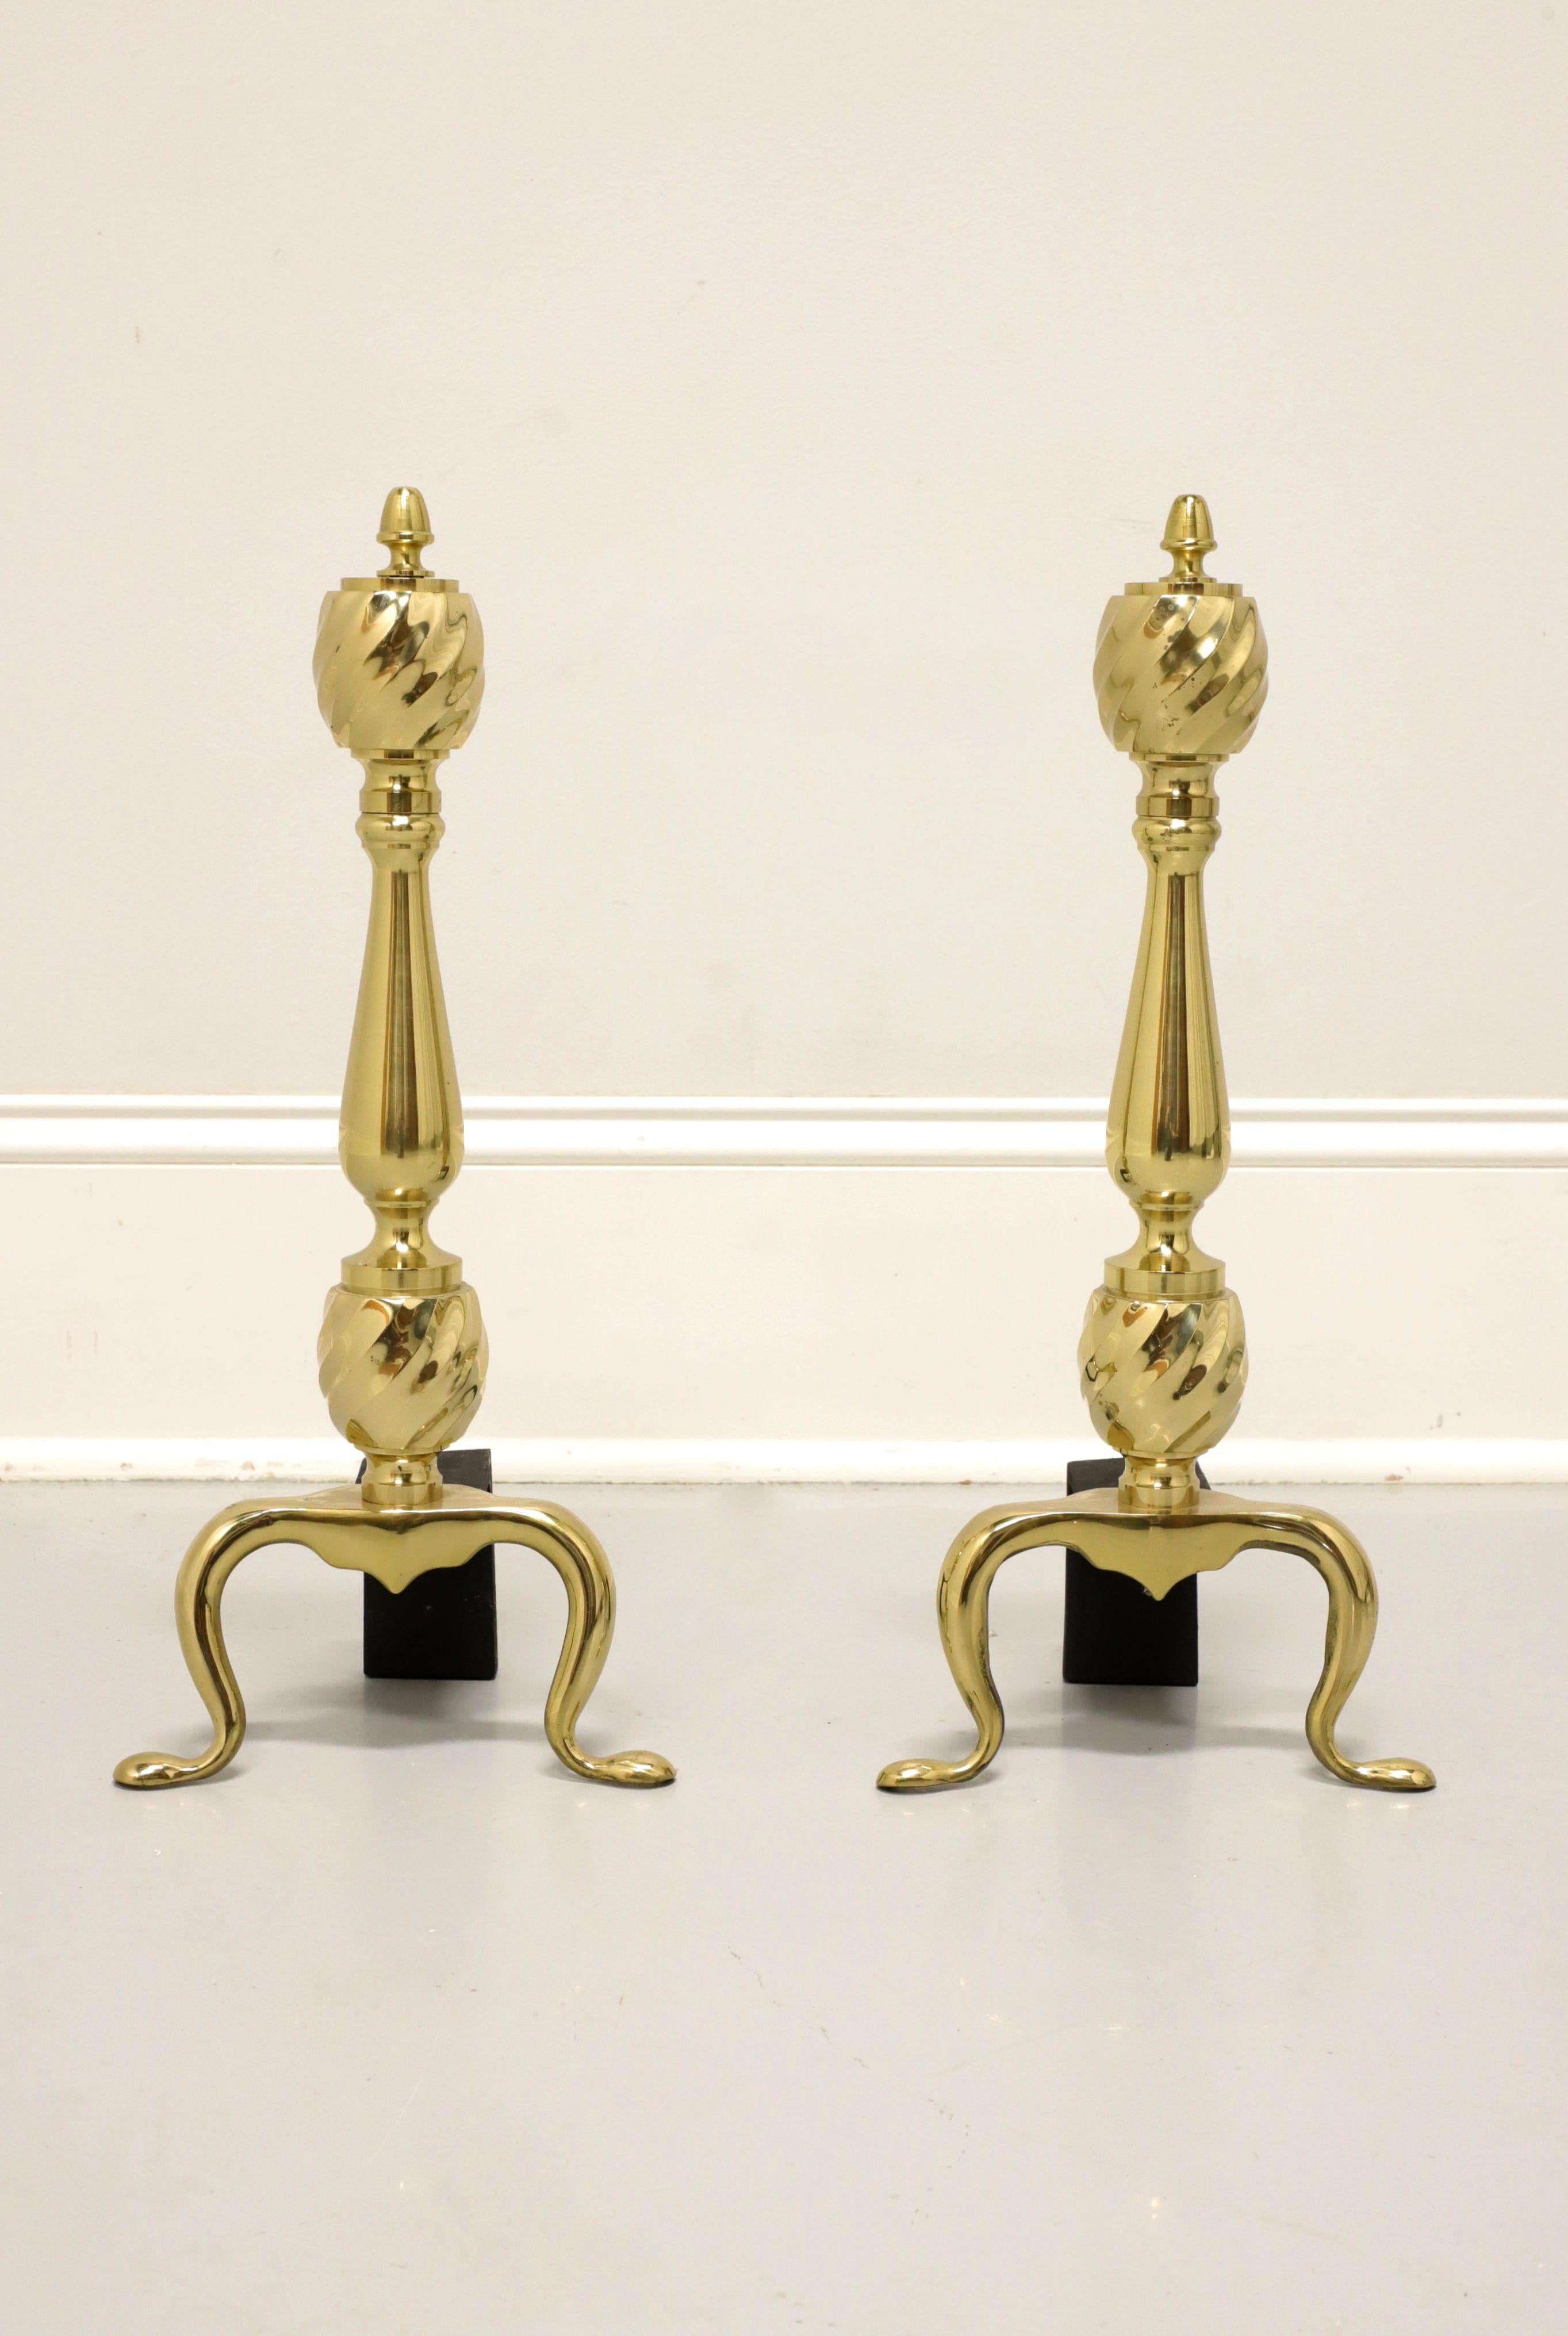 A pair of Traditional style fireplace andirons by Virginia Metalcrafters. Solid polished brass andirons and black iron metal billets. Andirons have a pine cone shape to the finial, a decorative swirl pattern to finial & plinth, cabriole legs and pad